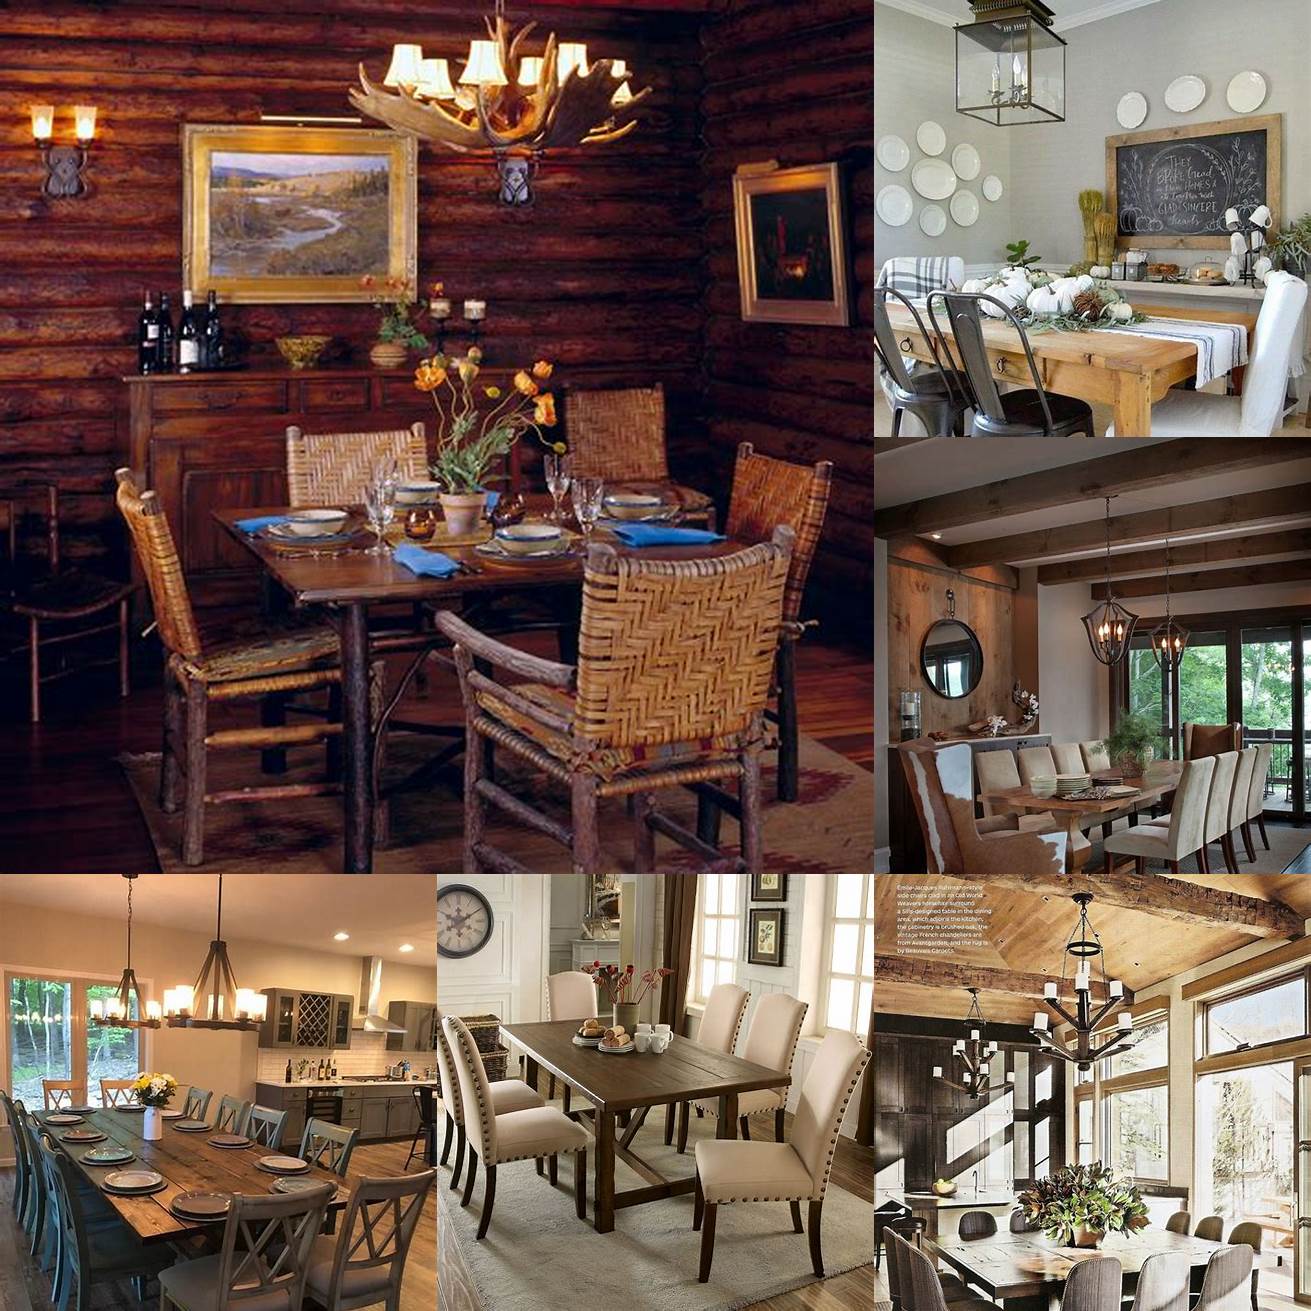 Cozy dining room with rustic table and chairs